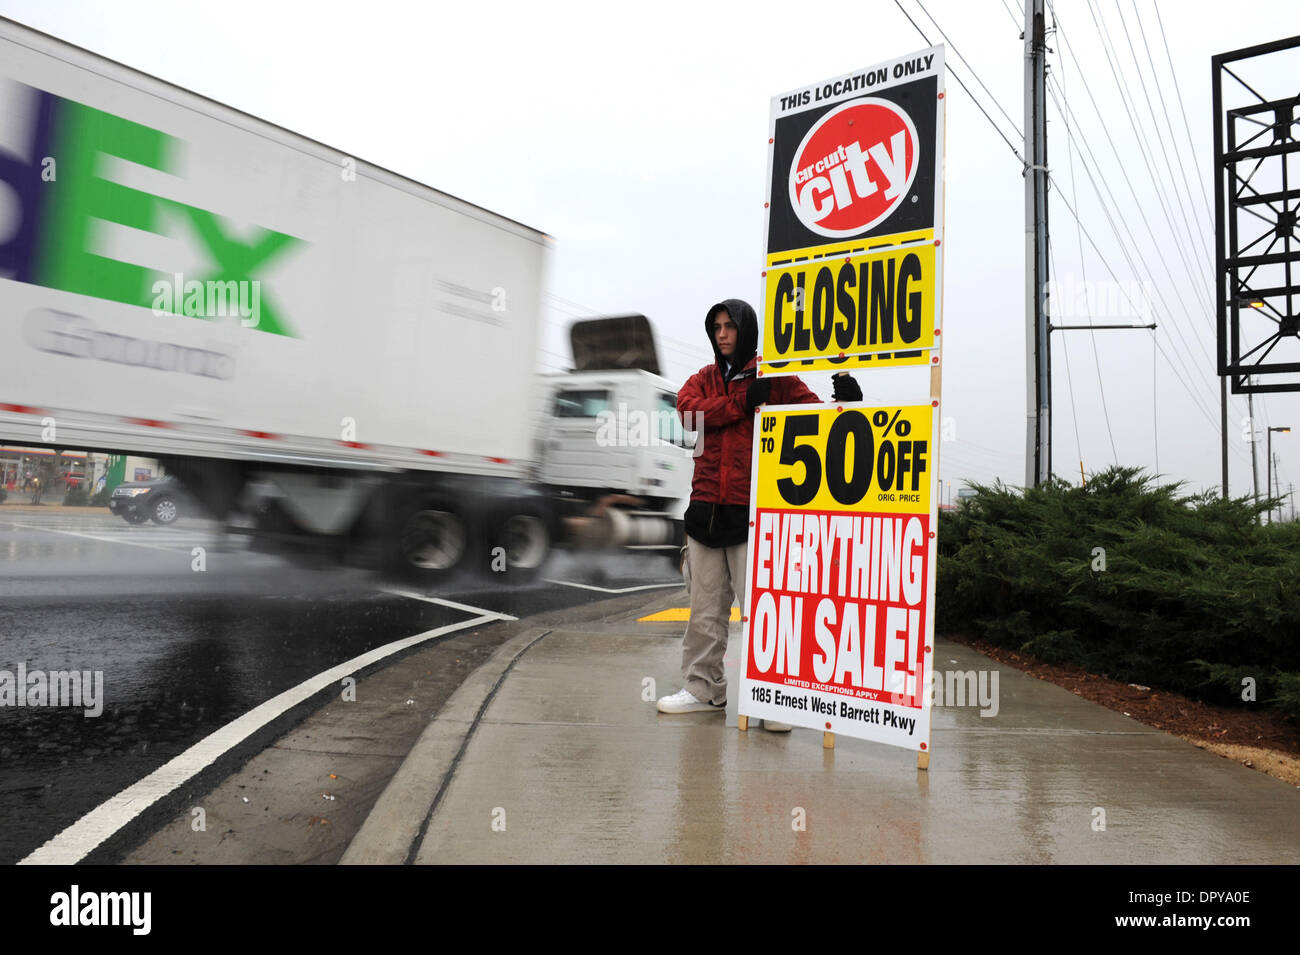 Dec 04, 2008 - Kennesaw, Georgia, USA - MICHAEL KRAMER, 19, stands in cold December drizzle holding sign advertising Circuit City store closing sale. The chain is shuttering 155 stores in the US, citing waning consumer confidence and a significantly weakened retail environment. (Credit Image: © Robin Nelson/ZUMA Press) Stock Photo